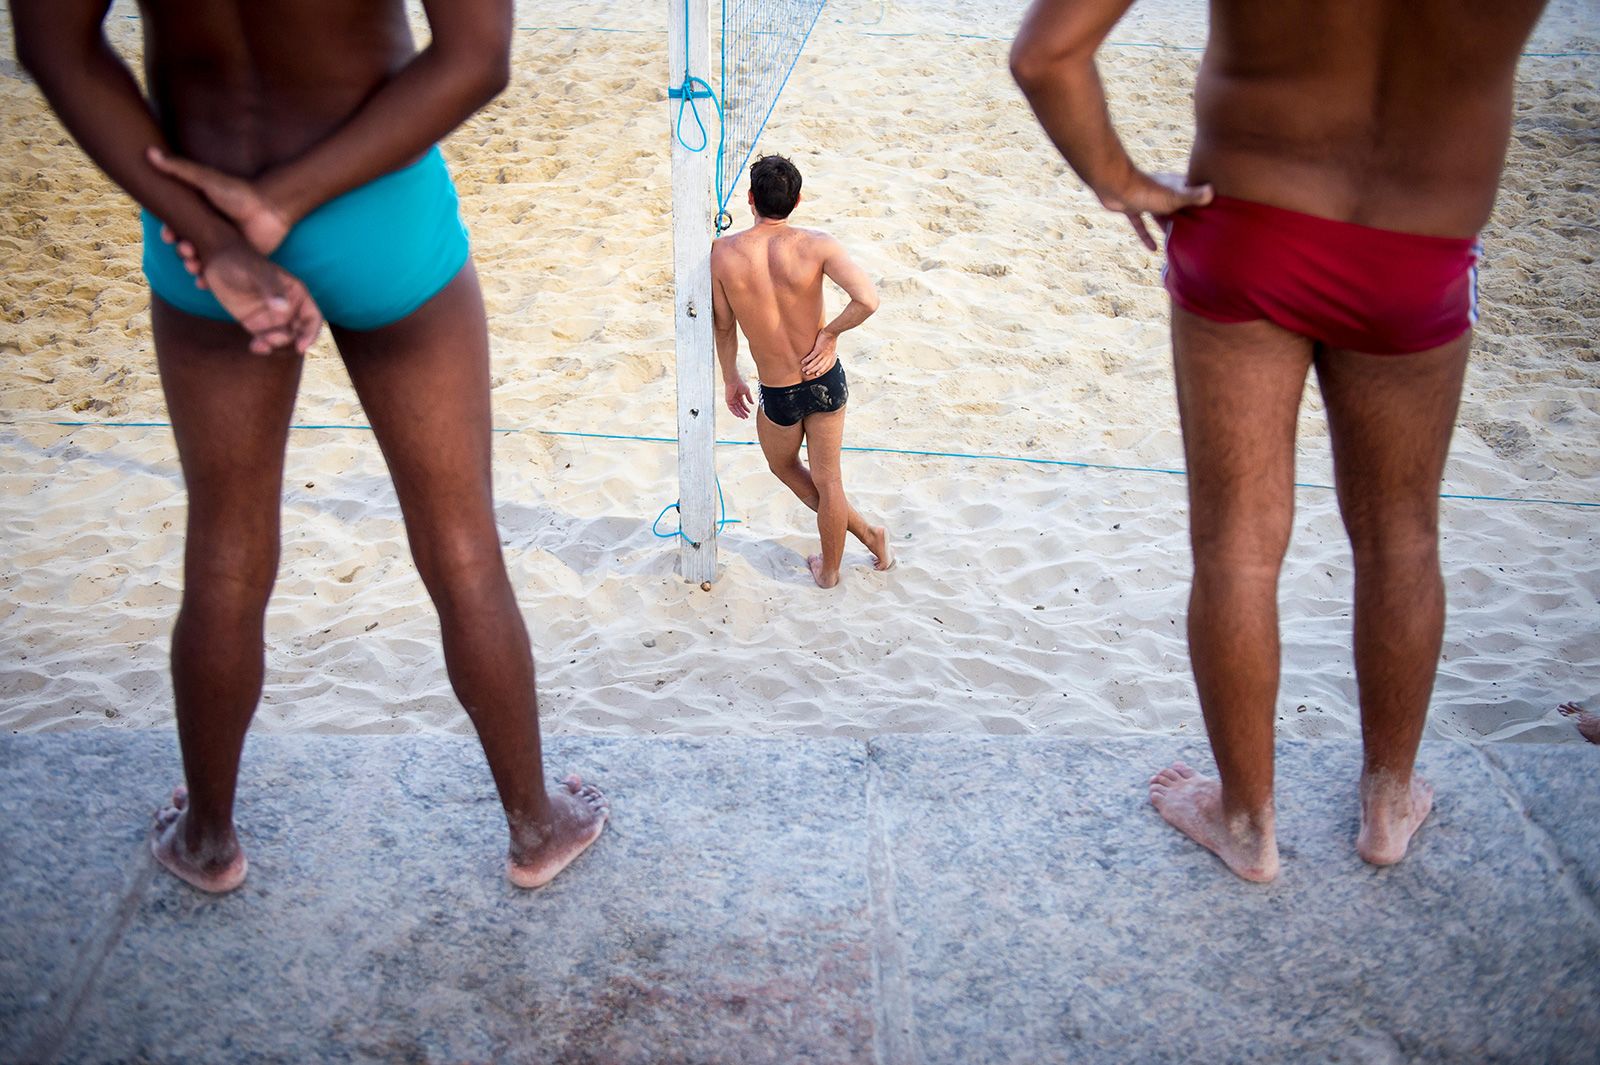 France's Bathing Suit Law Favors Skimpy Boxers Over Standard Trunks for  Men - Air Mail